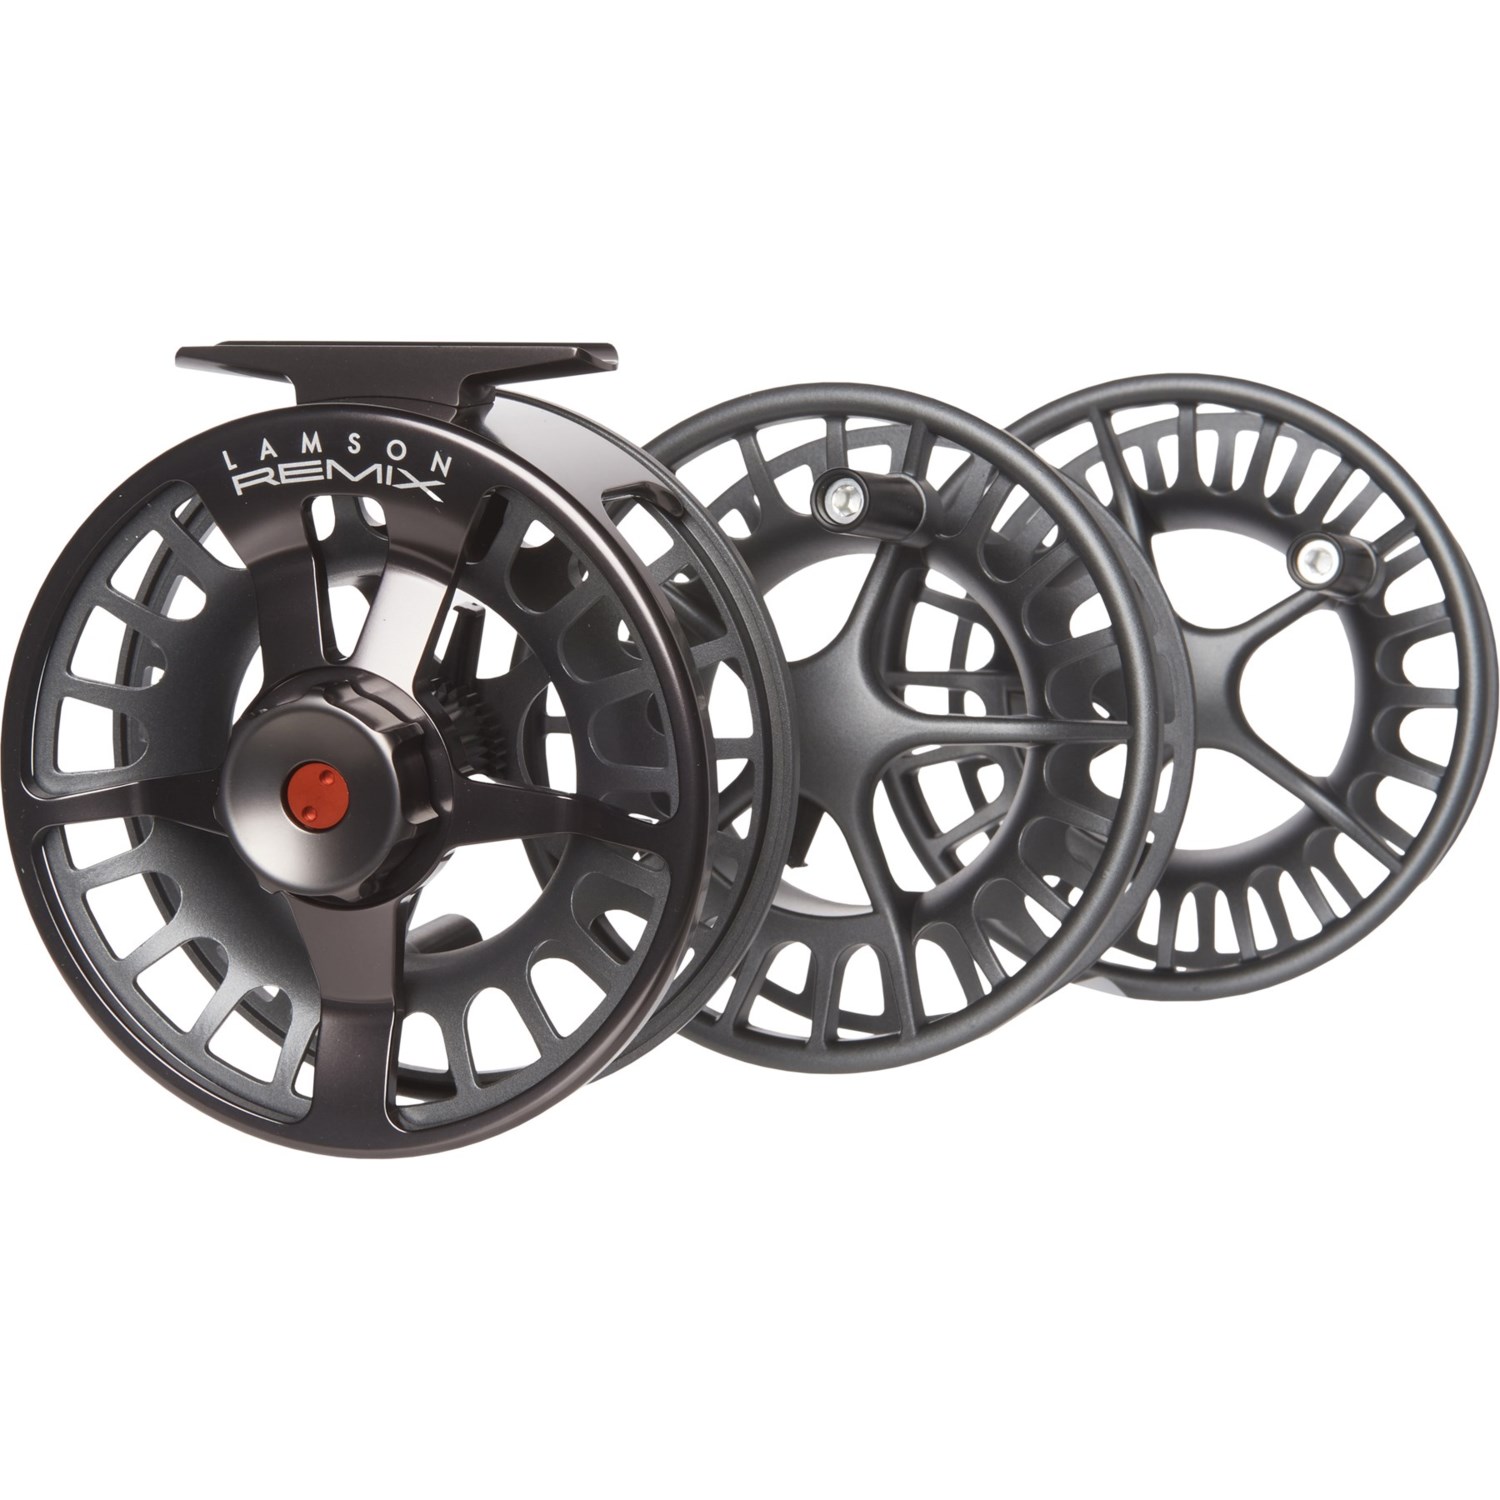 Lamson Remix -7+ Fly Reel - 3-Pack - Save 30%